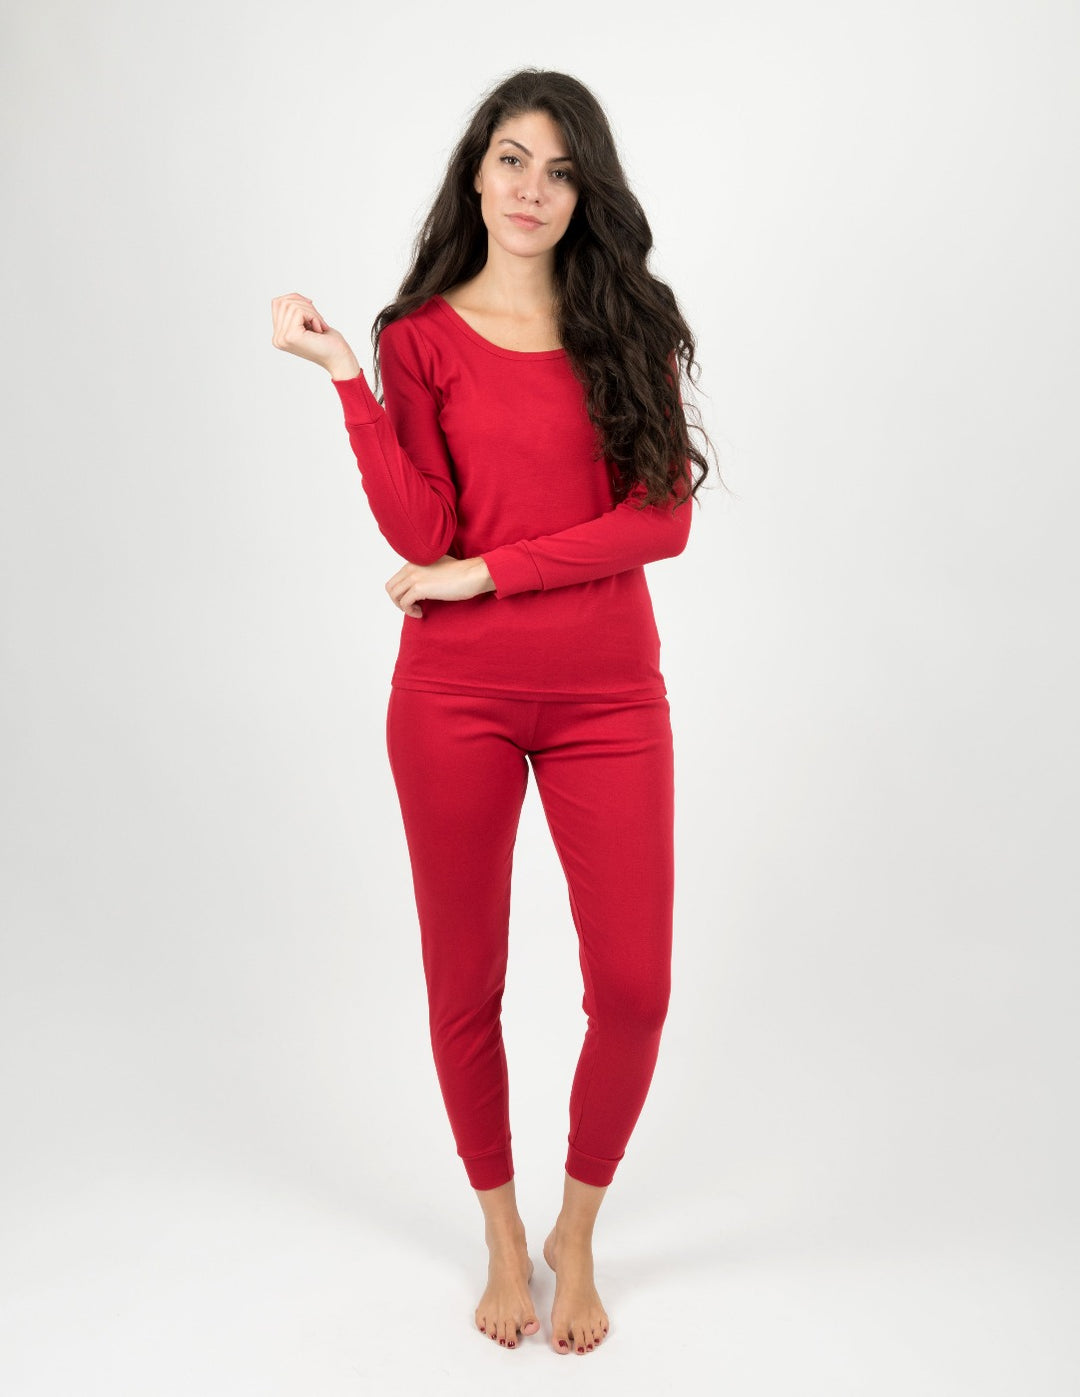 solid color red women's cotton pajamas